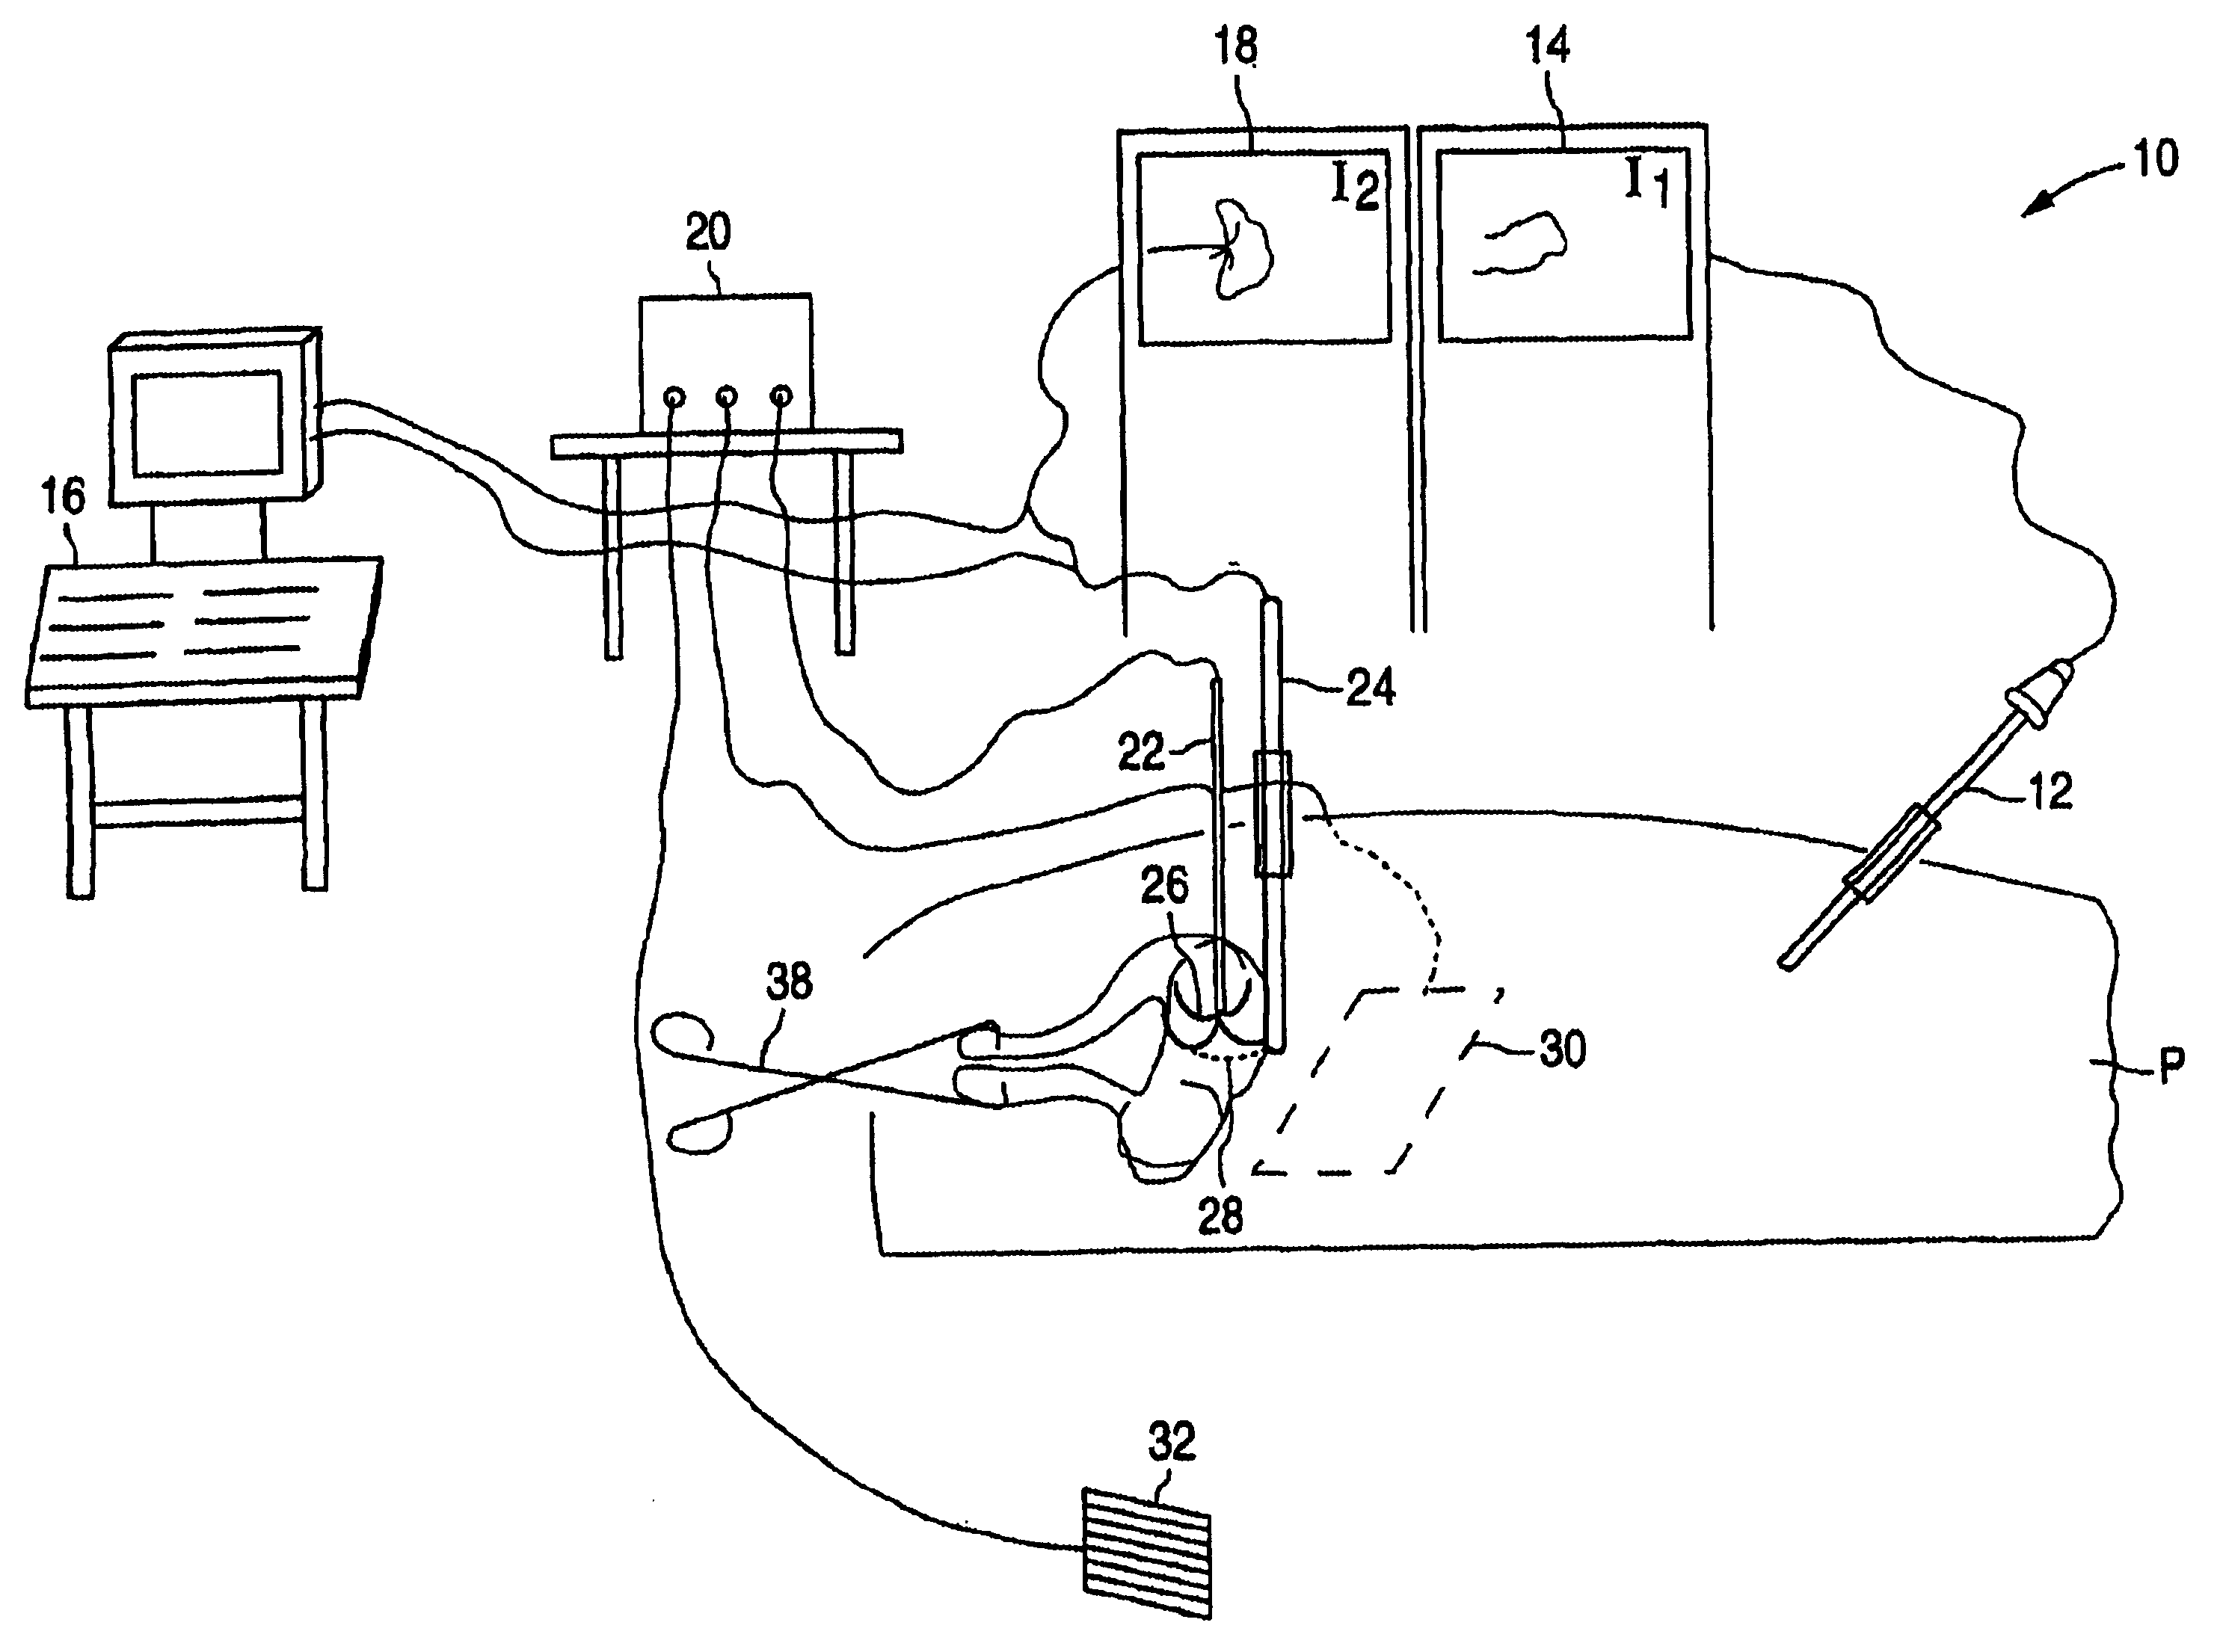 Gynecological ablation procedure and system using an ablation needle